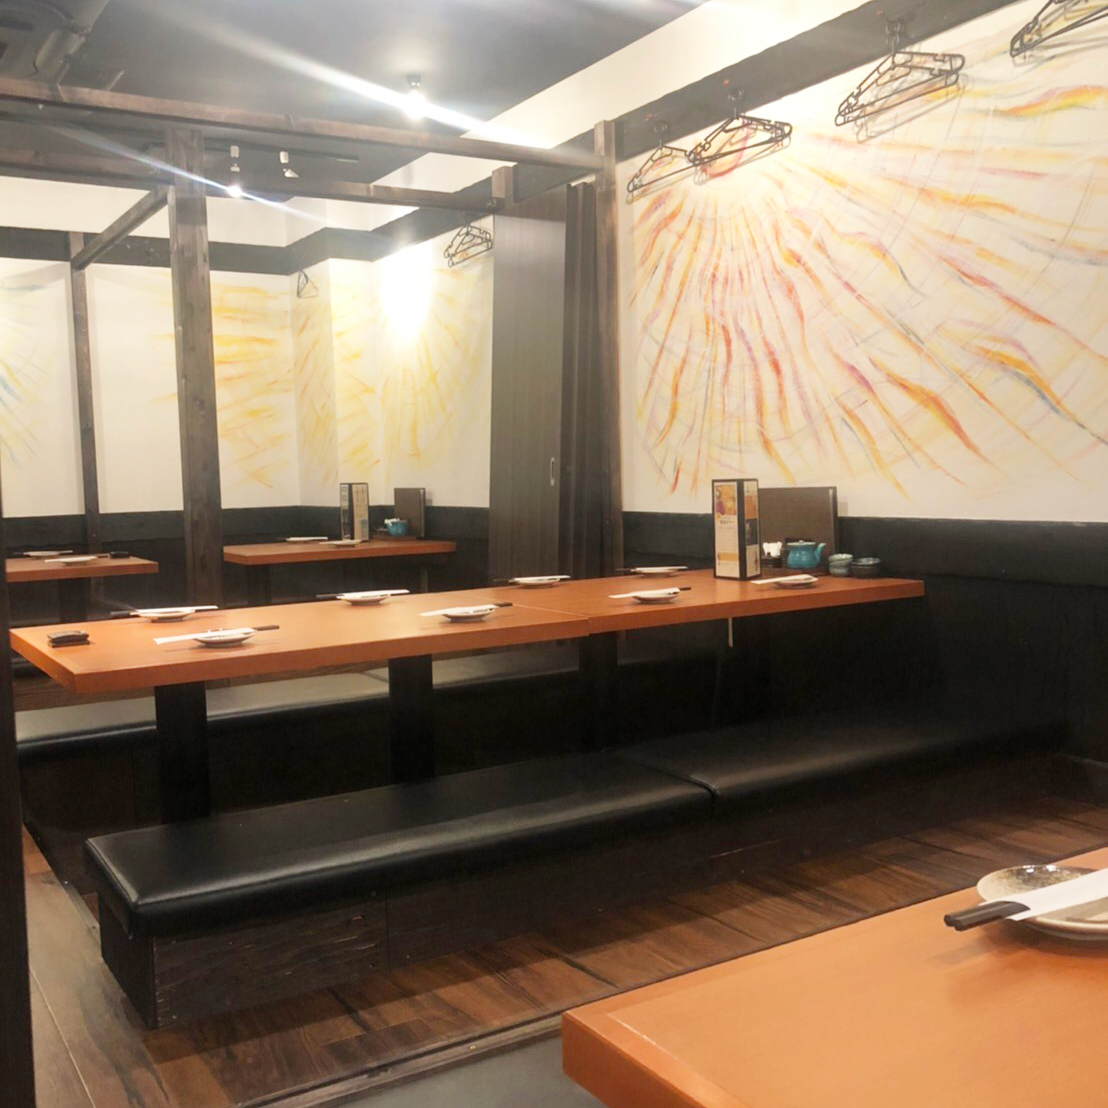 Perfect for banquets. Our private rooms are suitable for groups of 20 or more! Please use them.